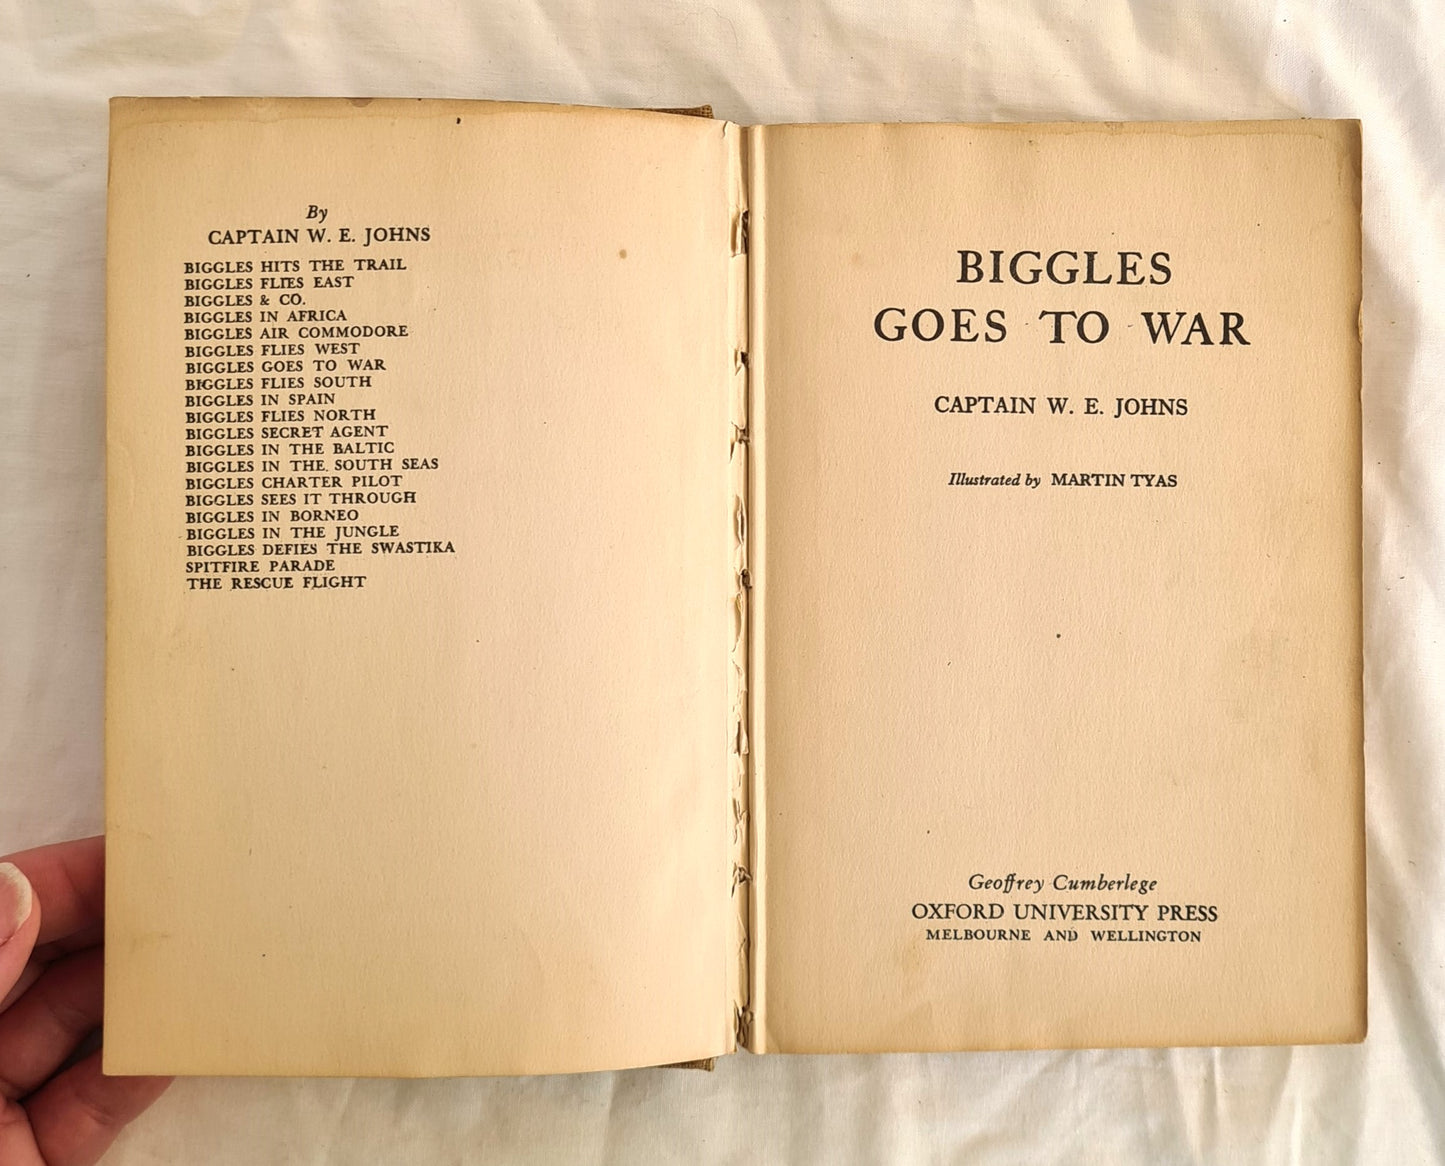 Biggles Goes to War by Captain W. E. Johns